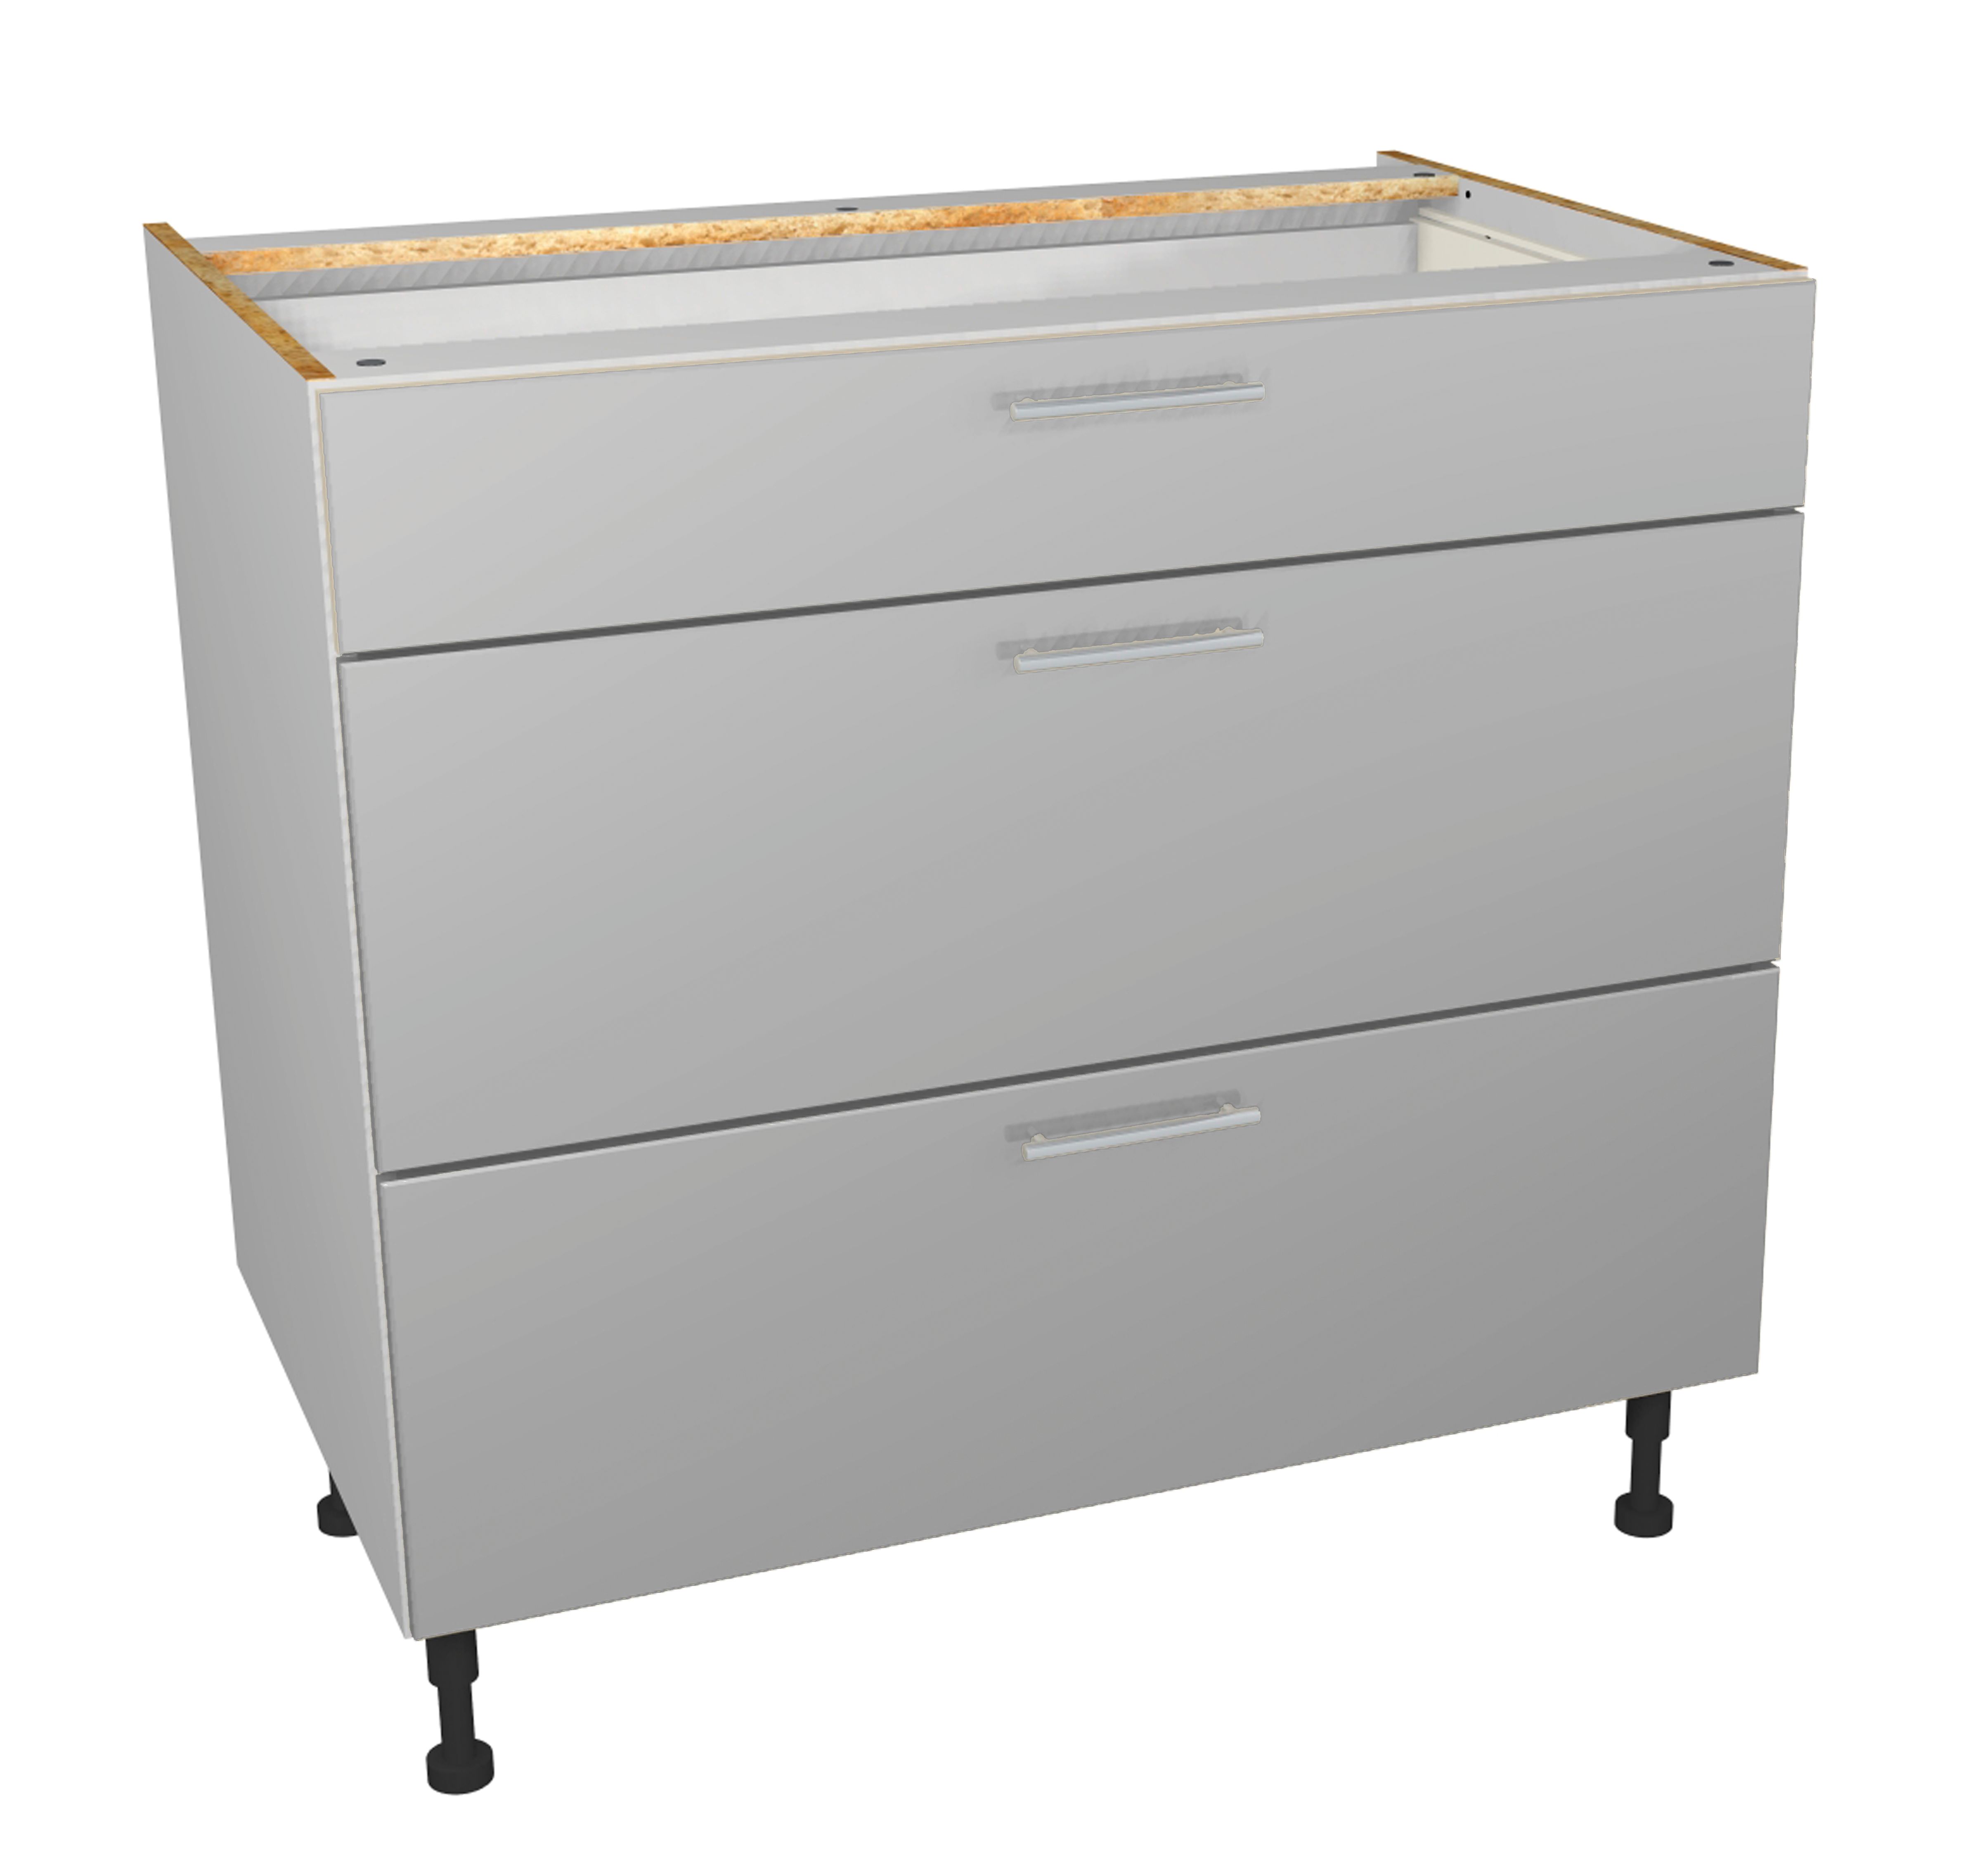 Image of Wickes Orlando Grey Gloss Slab Drawer Unit - 900mm Part 1 of 2